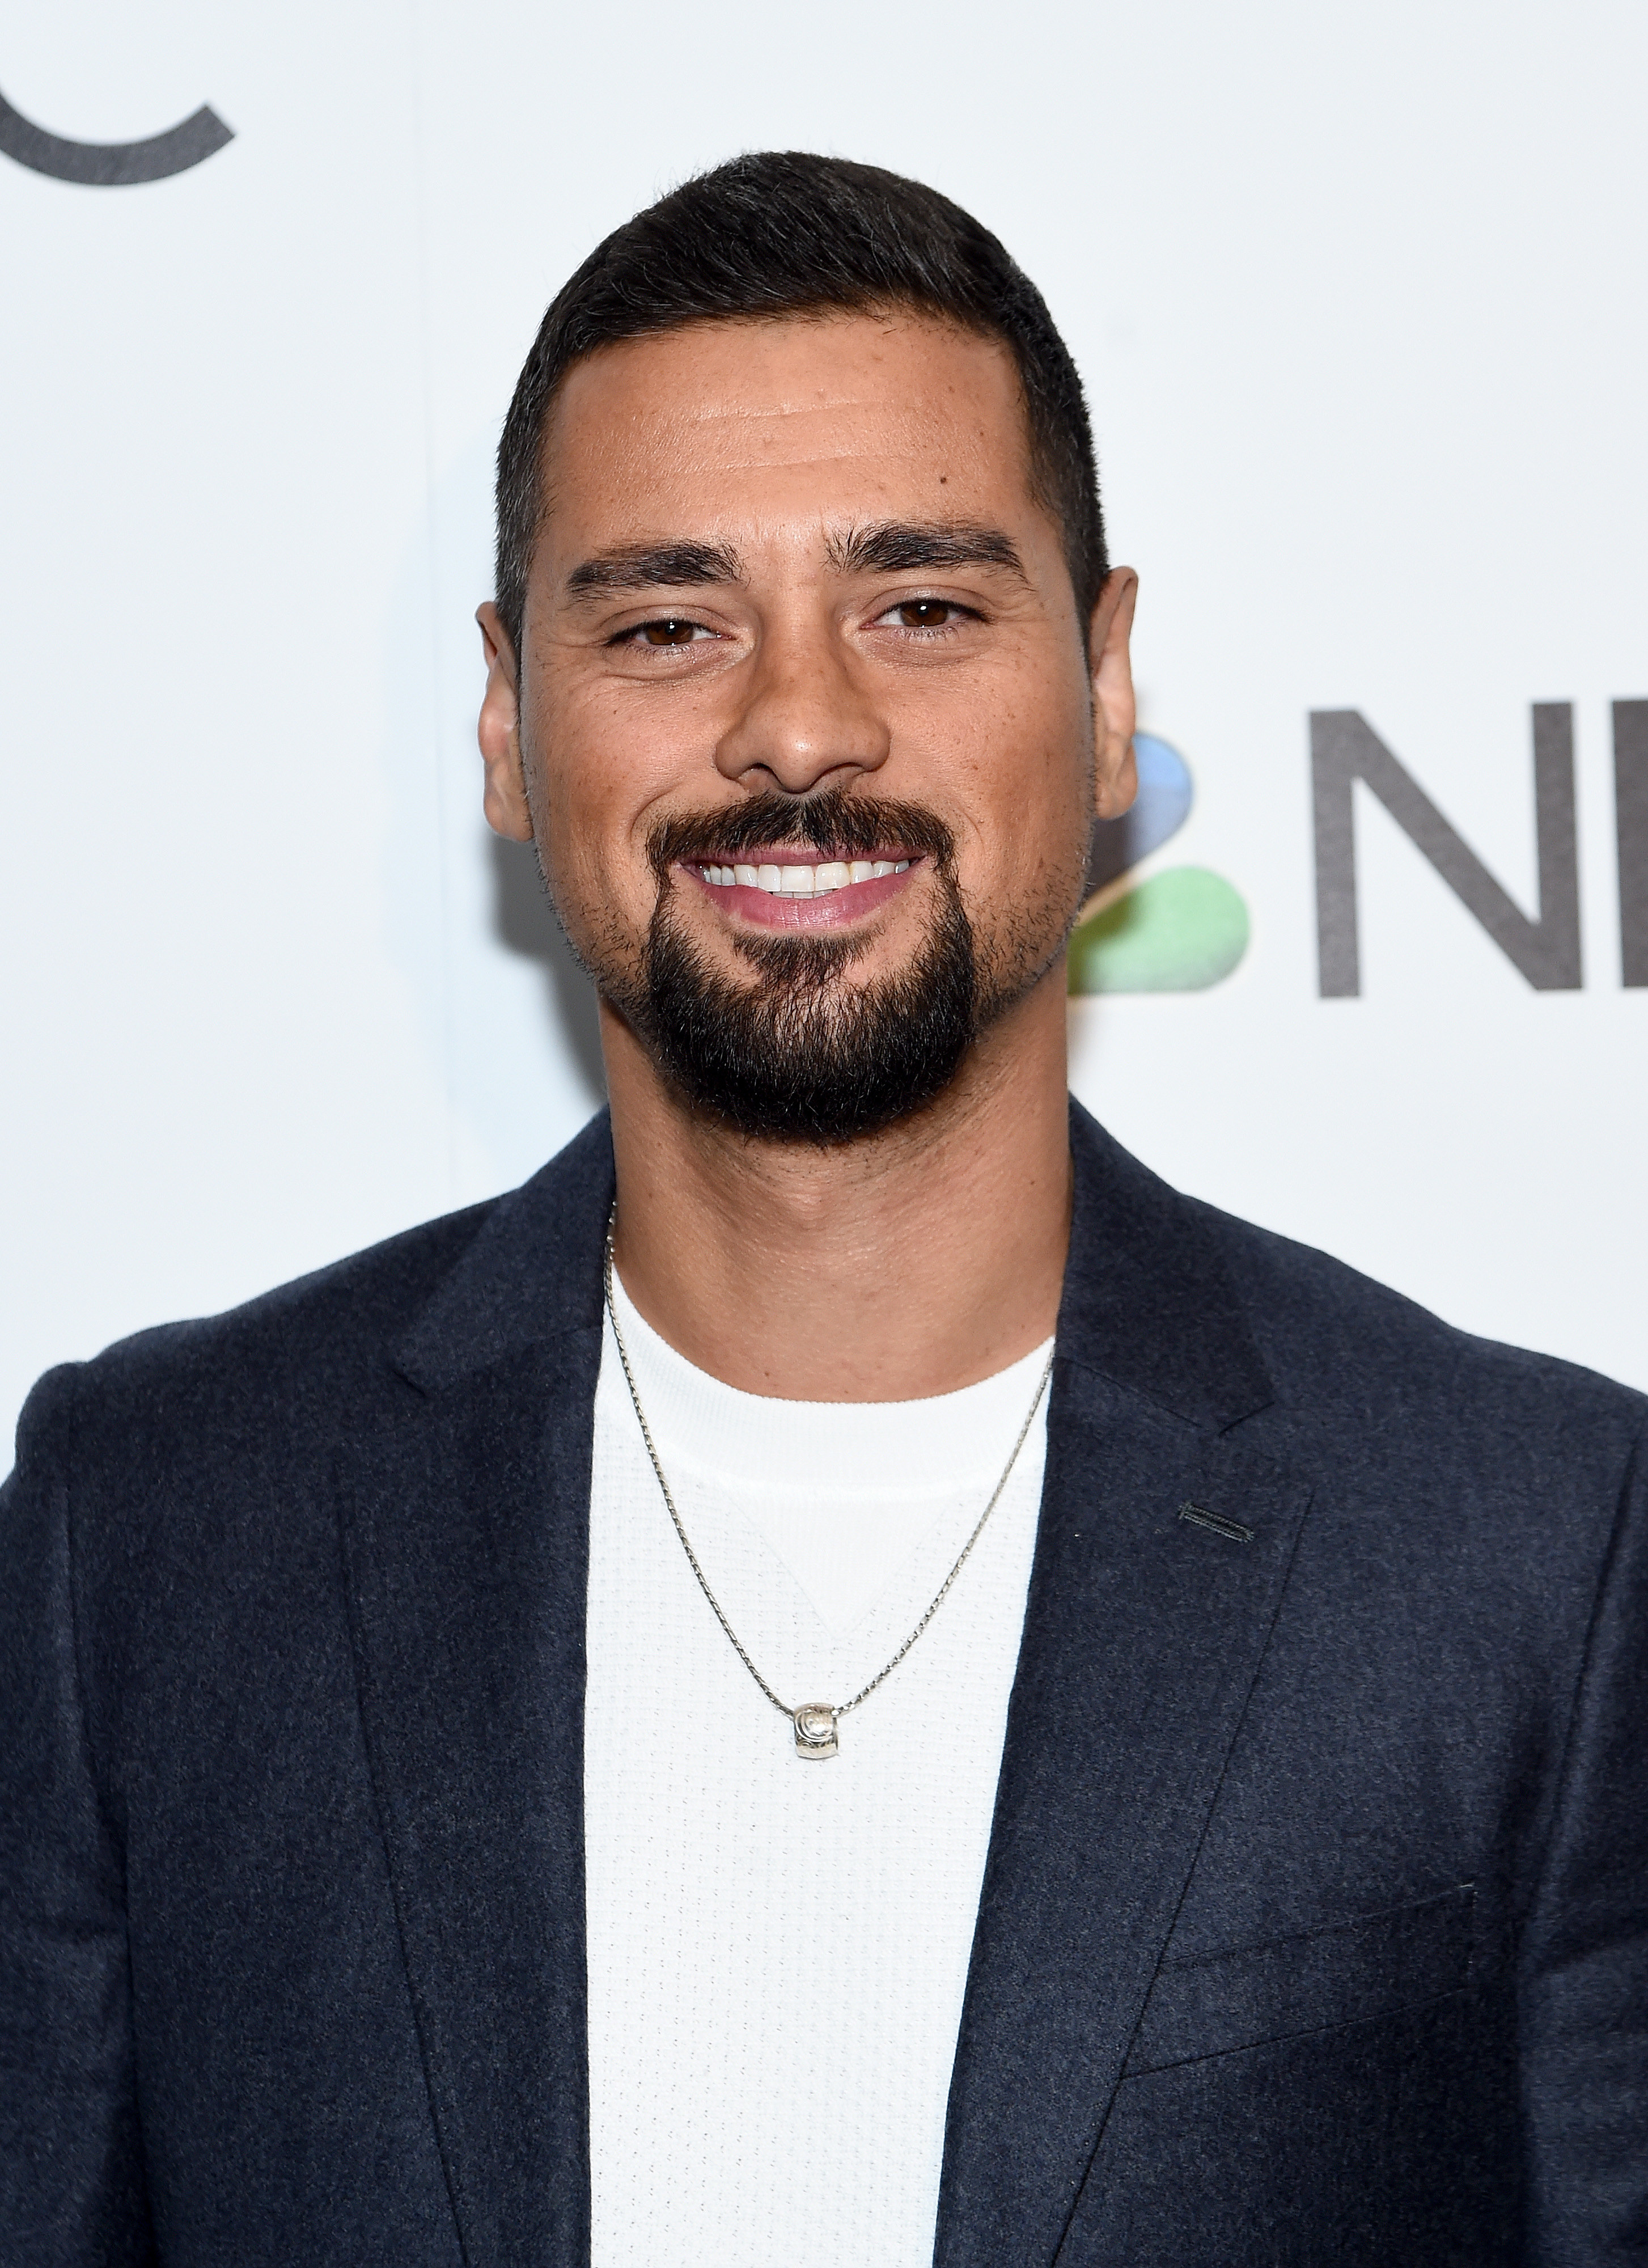 J.R. Ramirez attends NBC and The Cinema Society host a party For the casts of NBC Midseason 2020 at The Rainbow Room on January 23, 2020 in New York City.